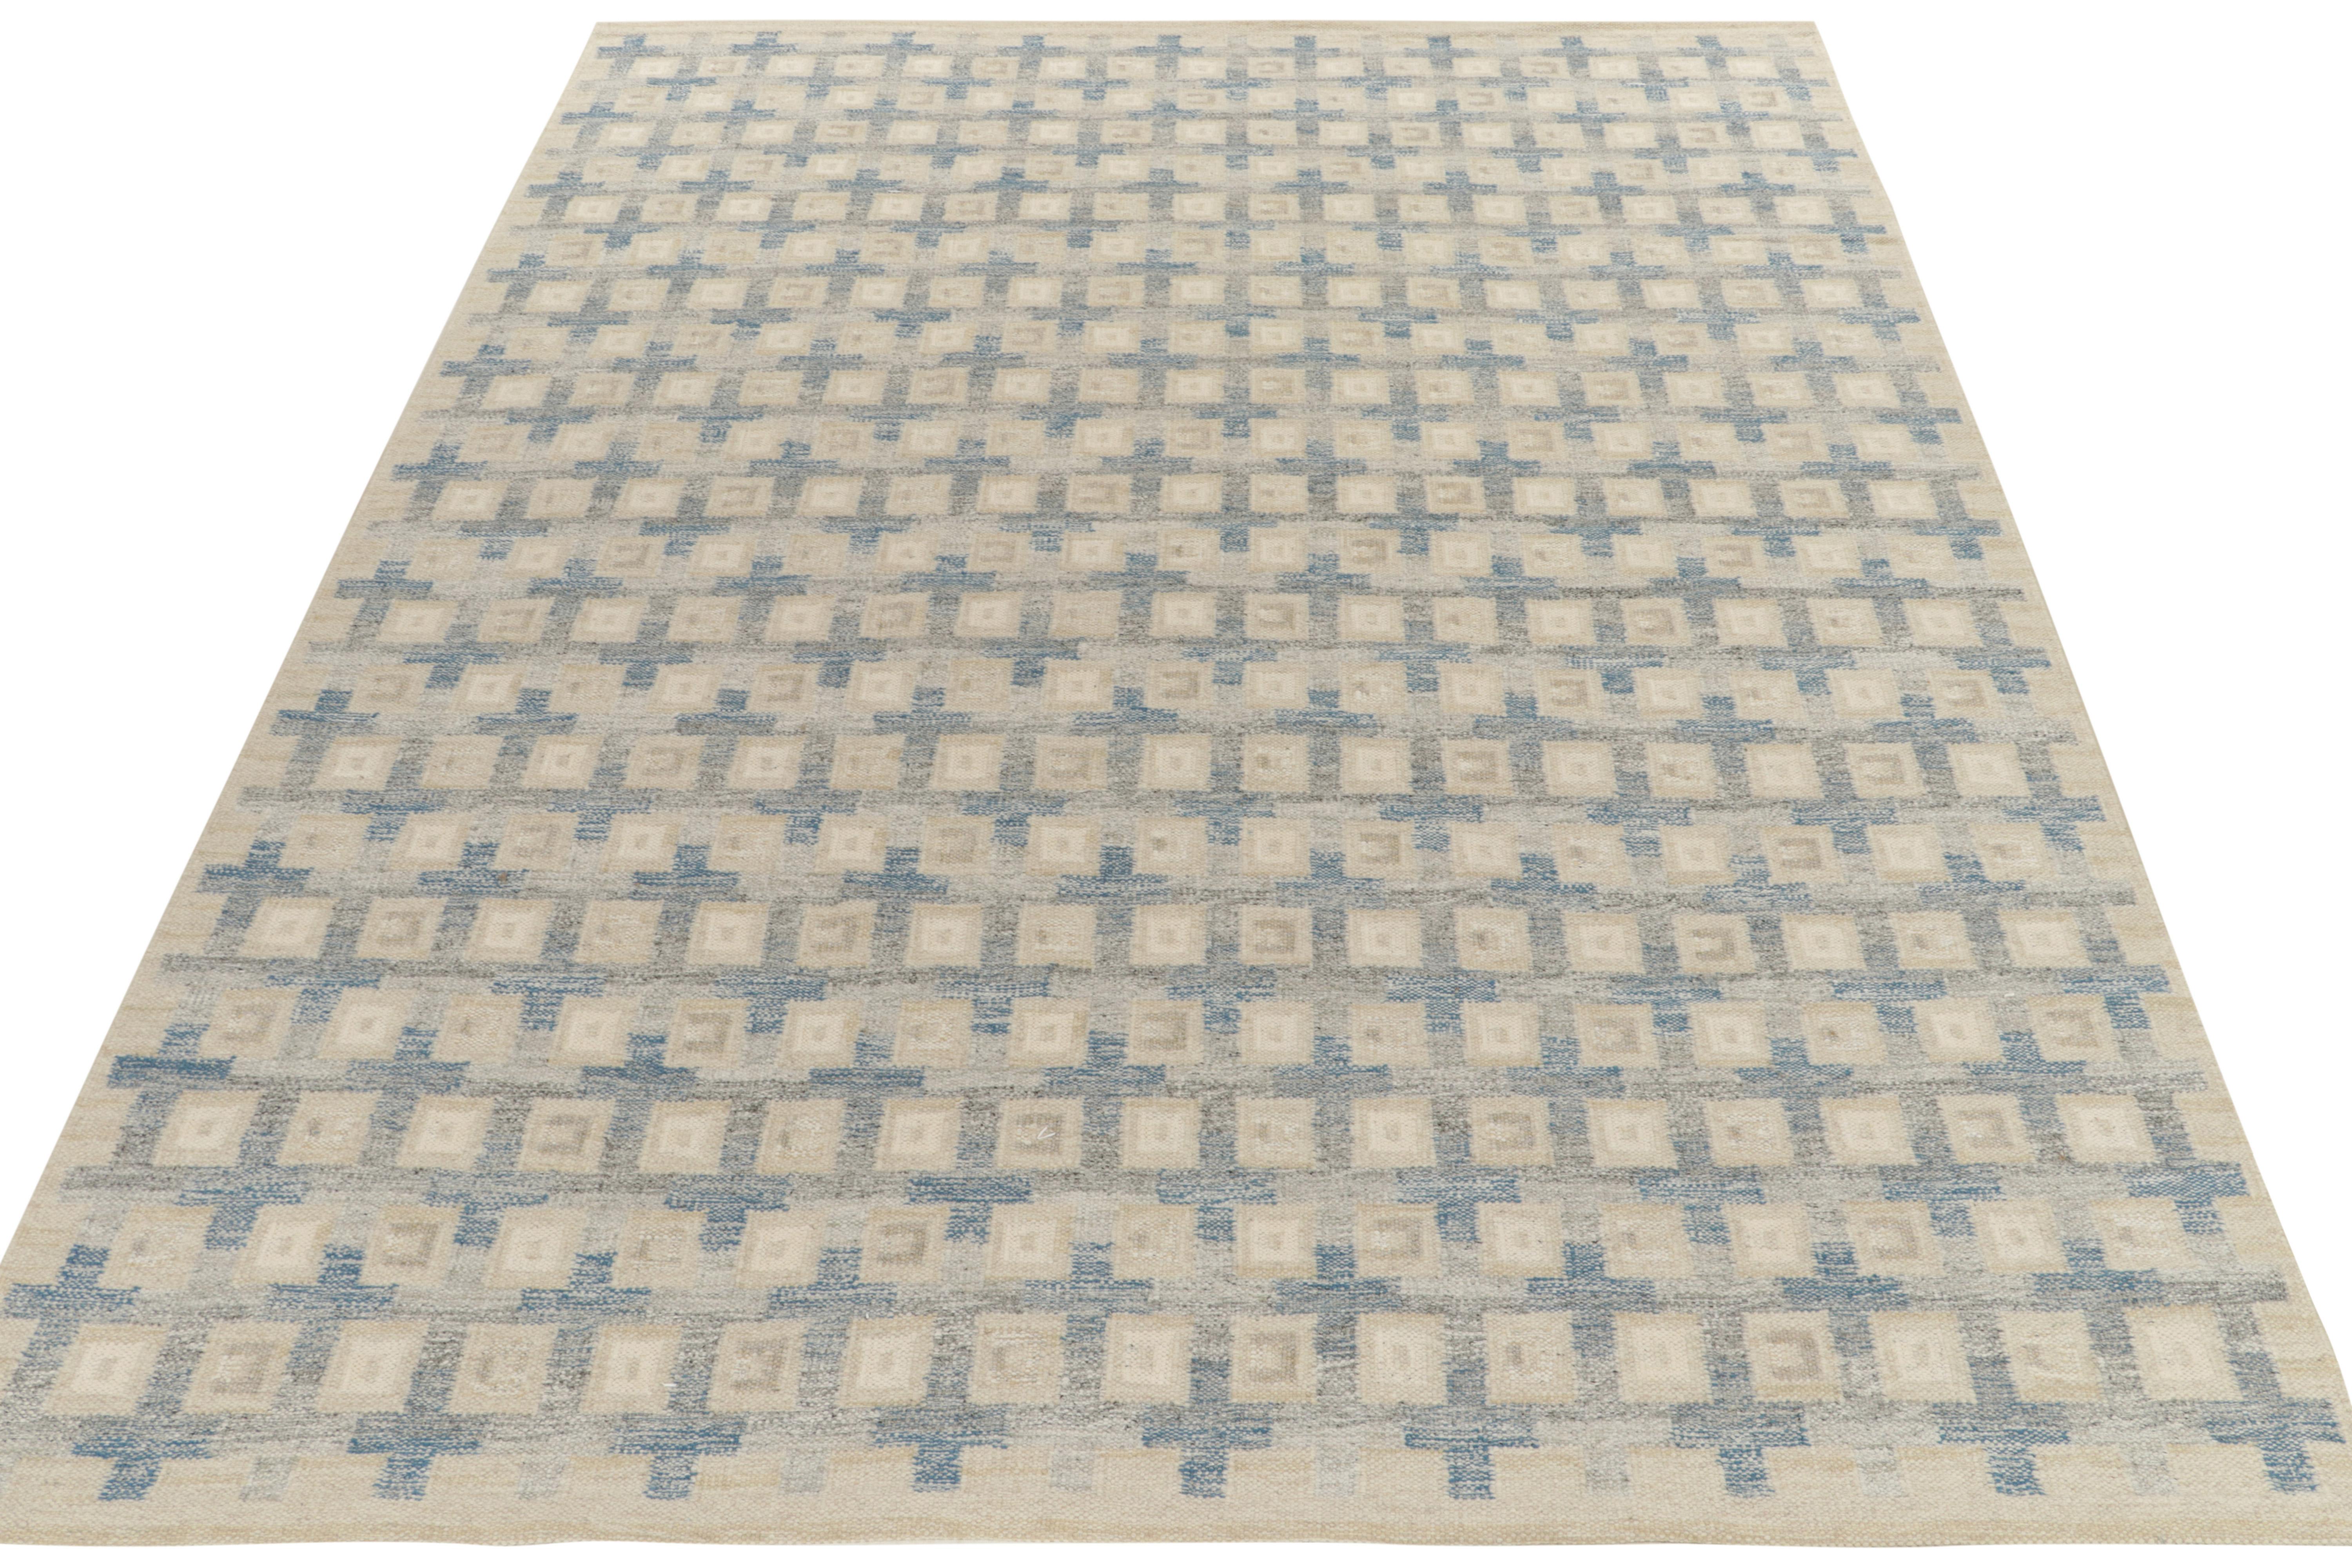 A hand woven flat weave from Rug & Kilim’s award-winning Scandinavian Kilim Collection. This 10 x 14 rug exemplifies the textural sensibility of the line as it complements the mid-century style geometric pattern—enjoying scintillating pagination in